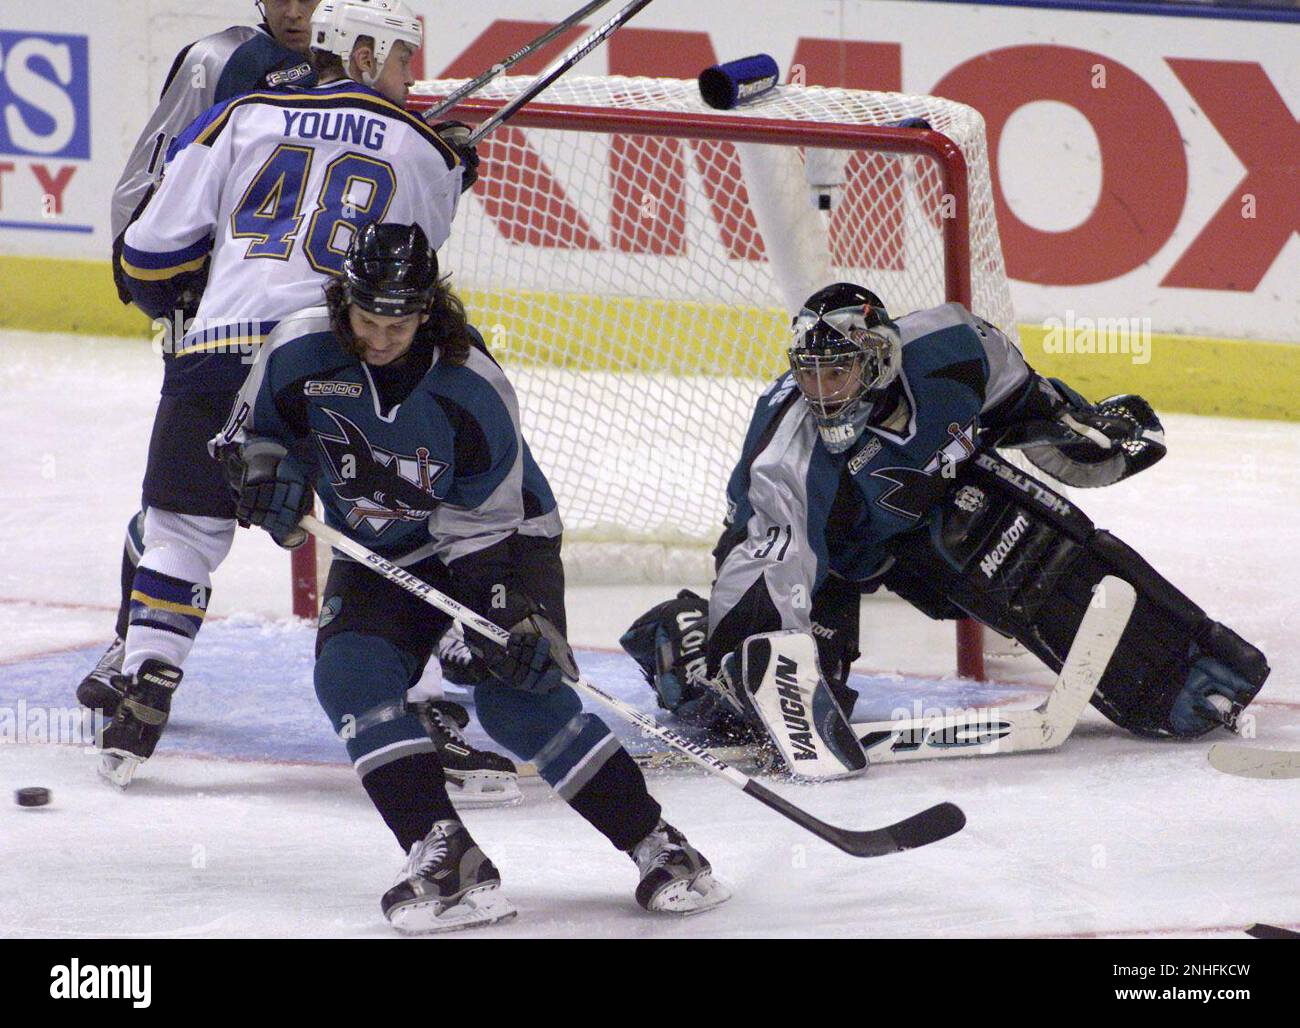 sharks538 mac.jpg The Blues 44- Chris Pronger was ejected from the